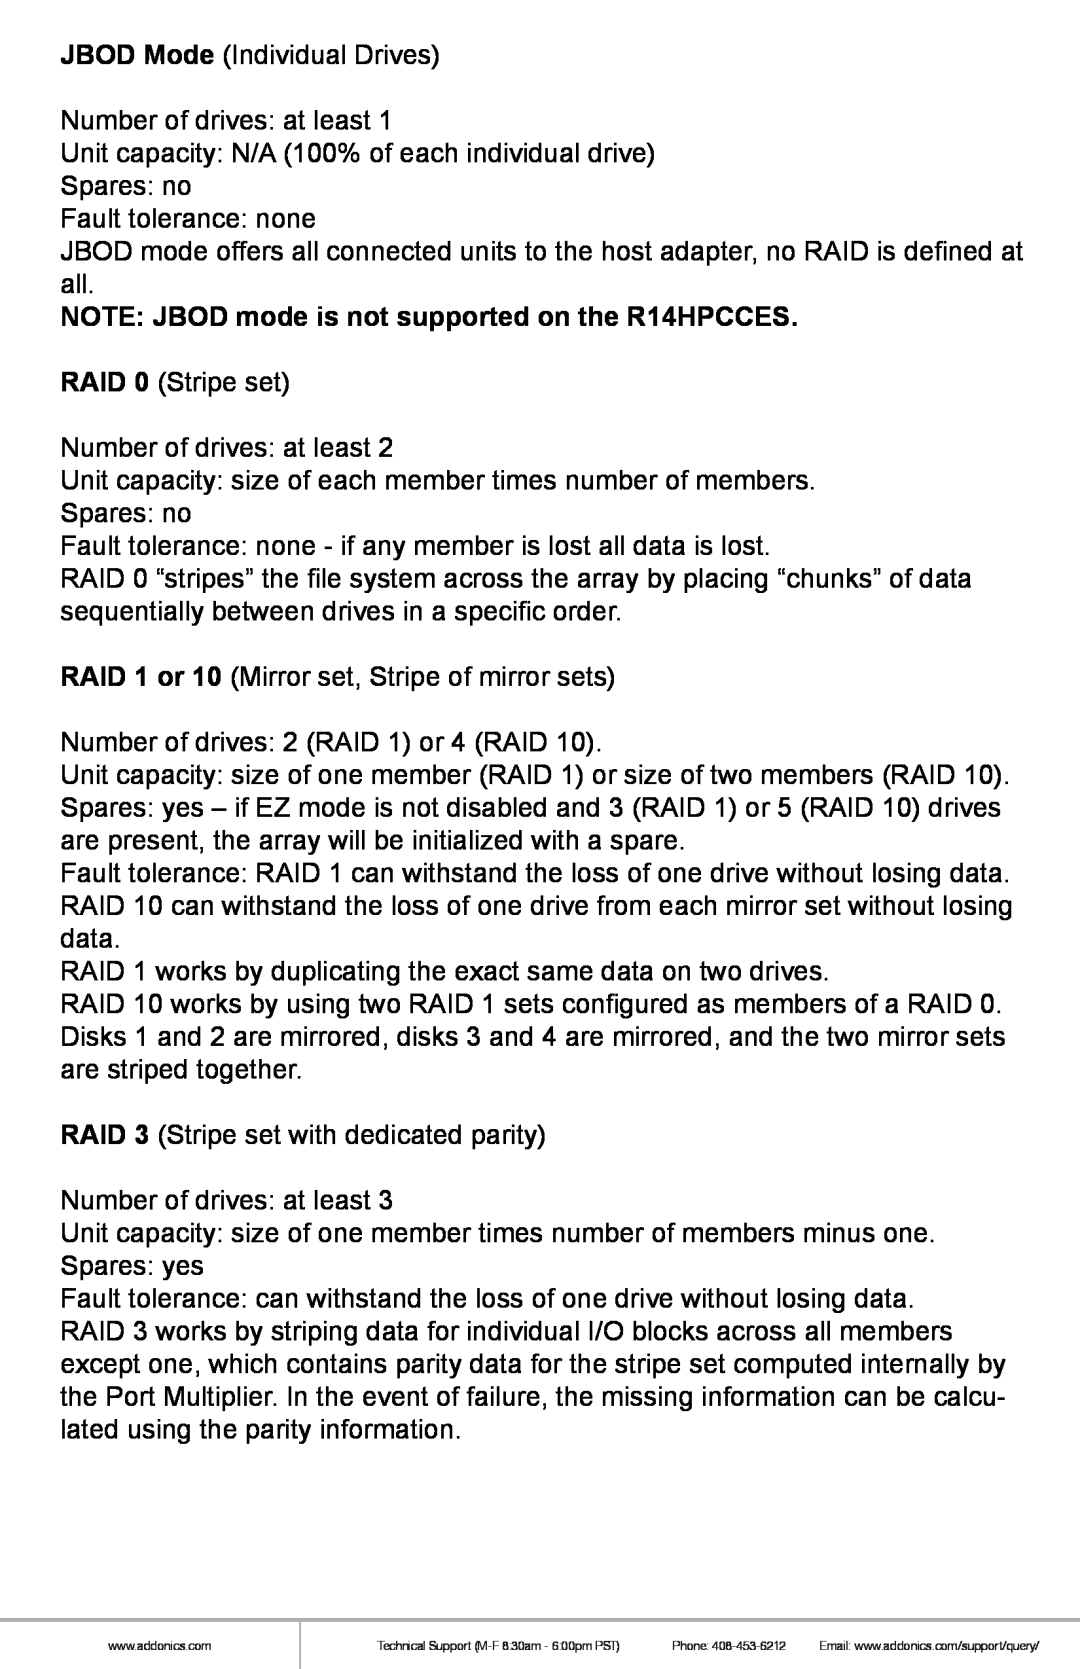 Addonics Technologies manual NOTE JBOD mode is not supported on the R14HPCCES 